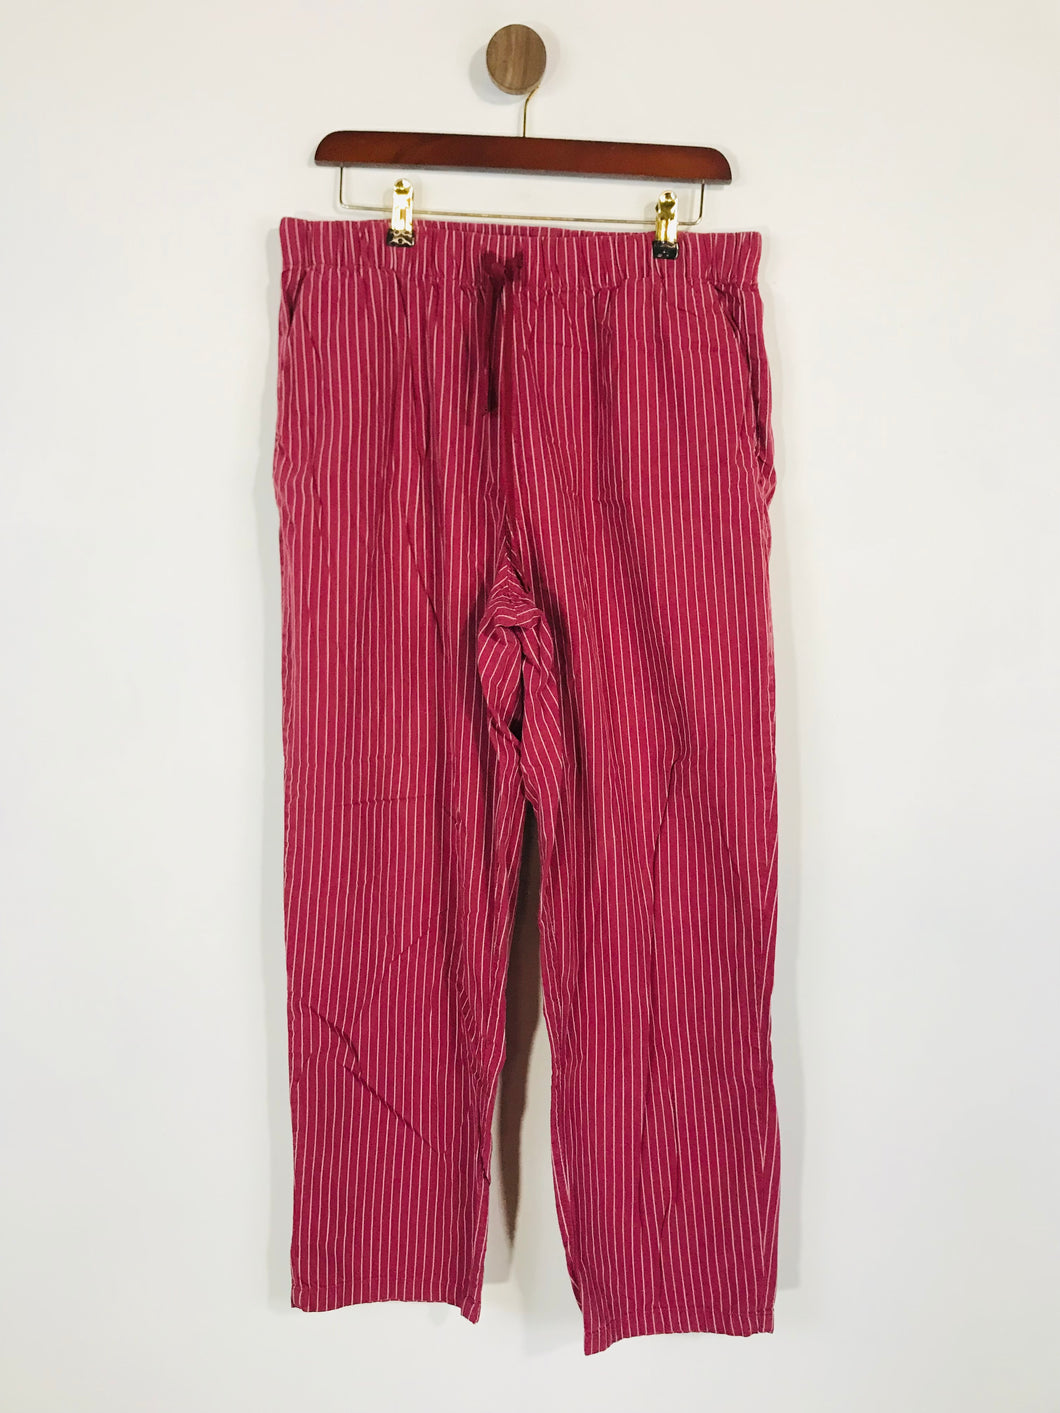 Uniqlo Women's Striped Sleep Casual Trousers | L UK14 | Red